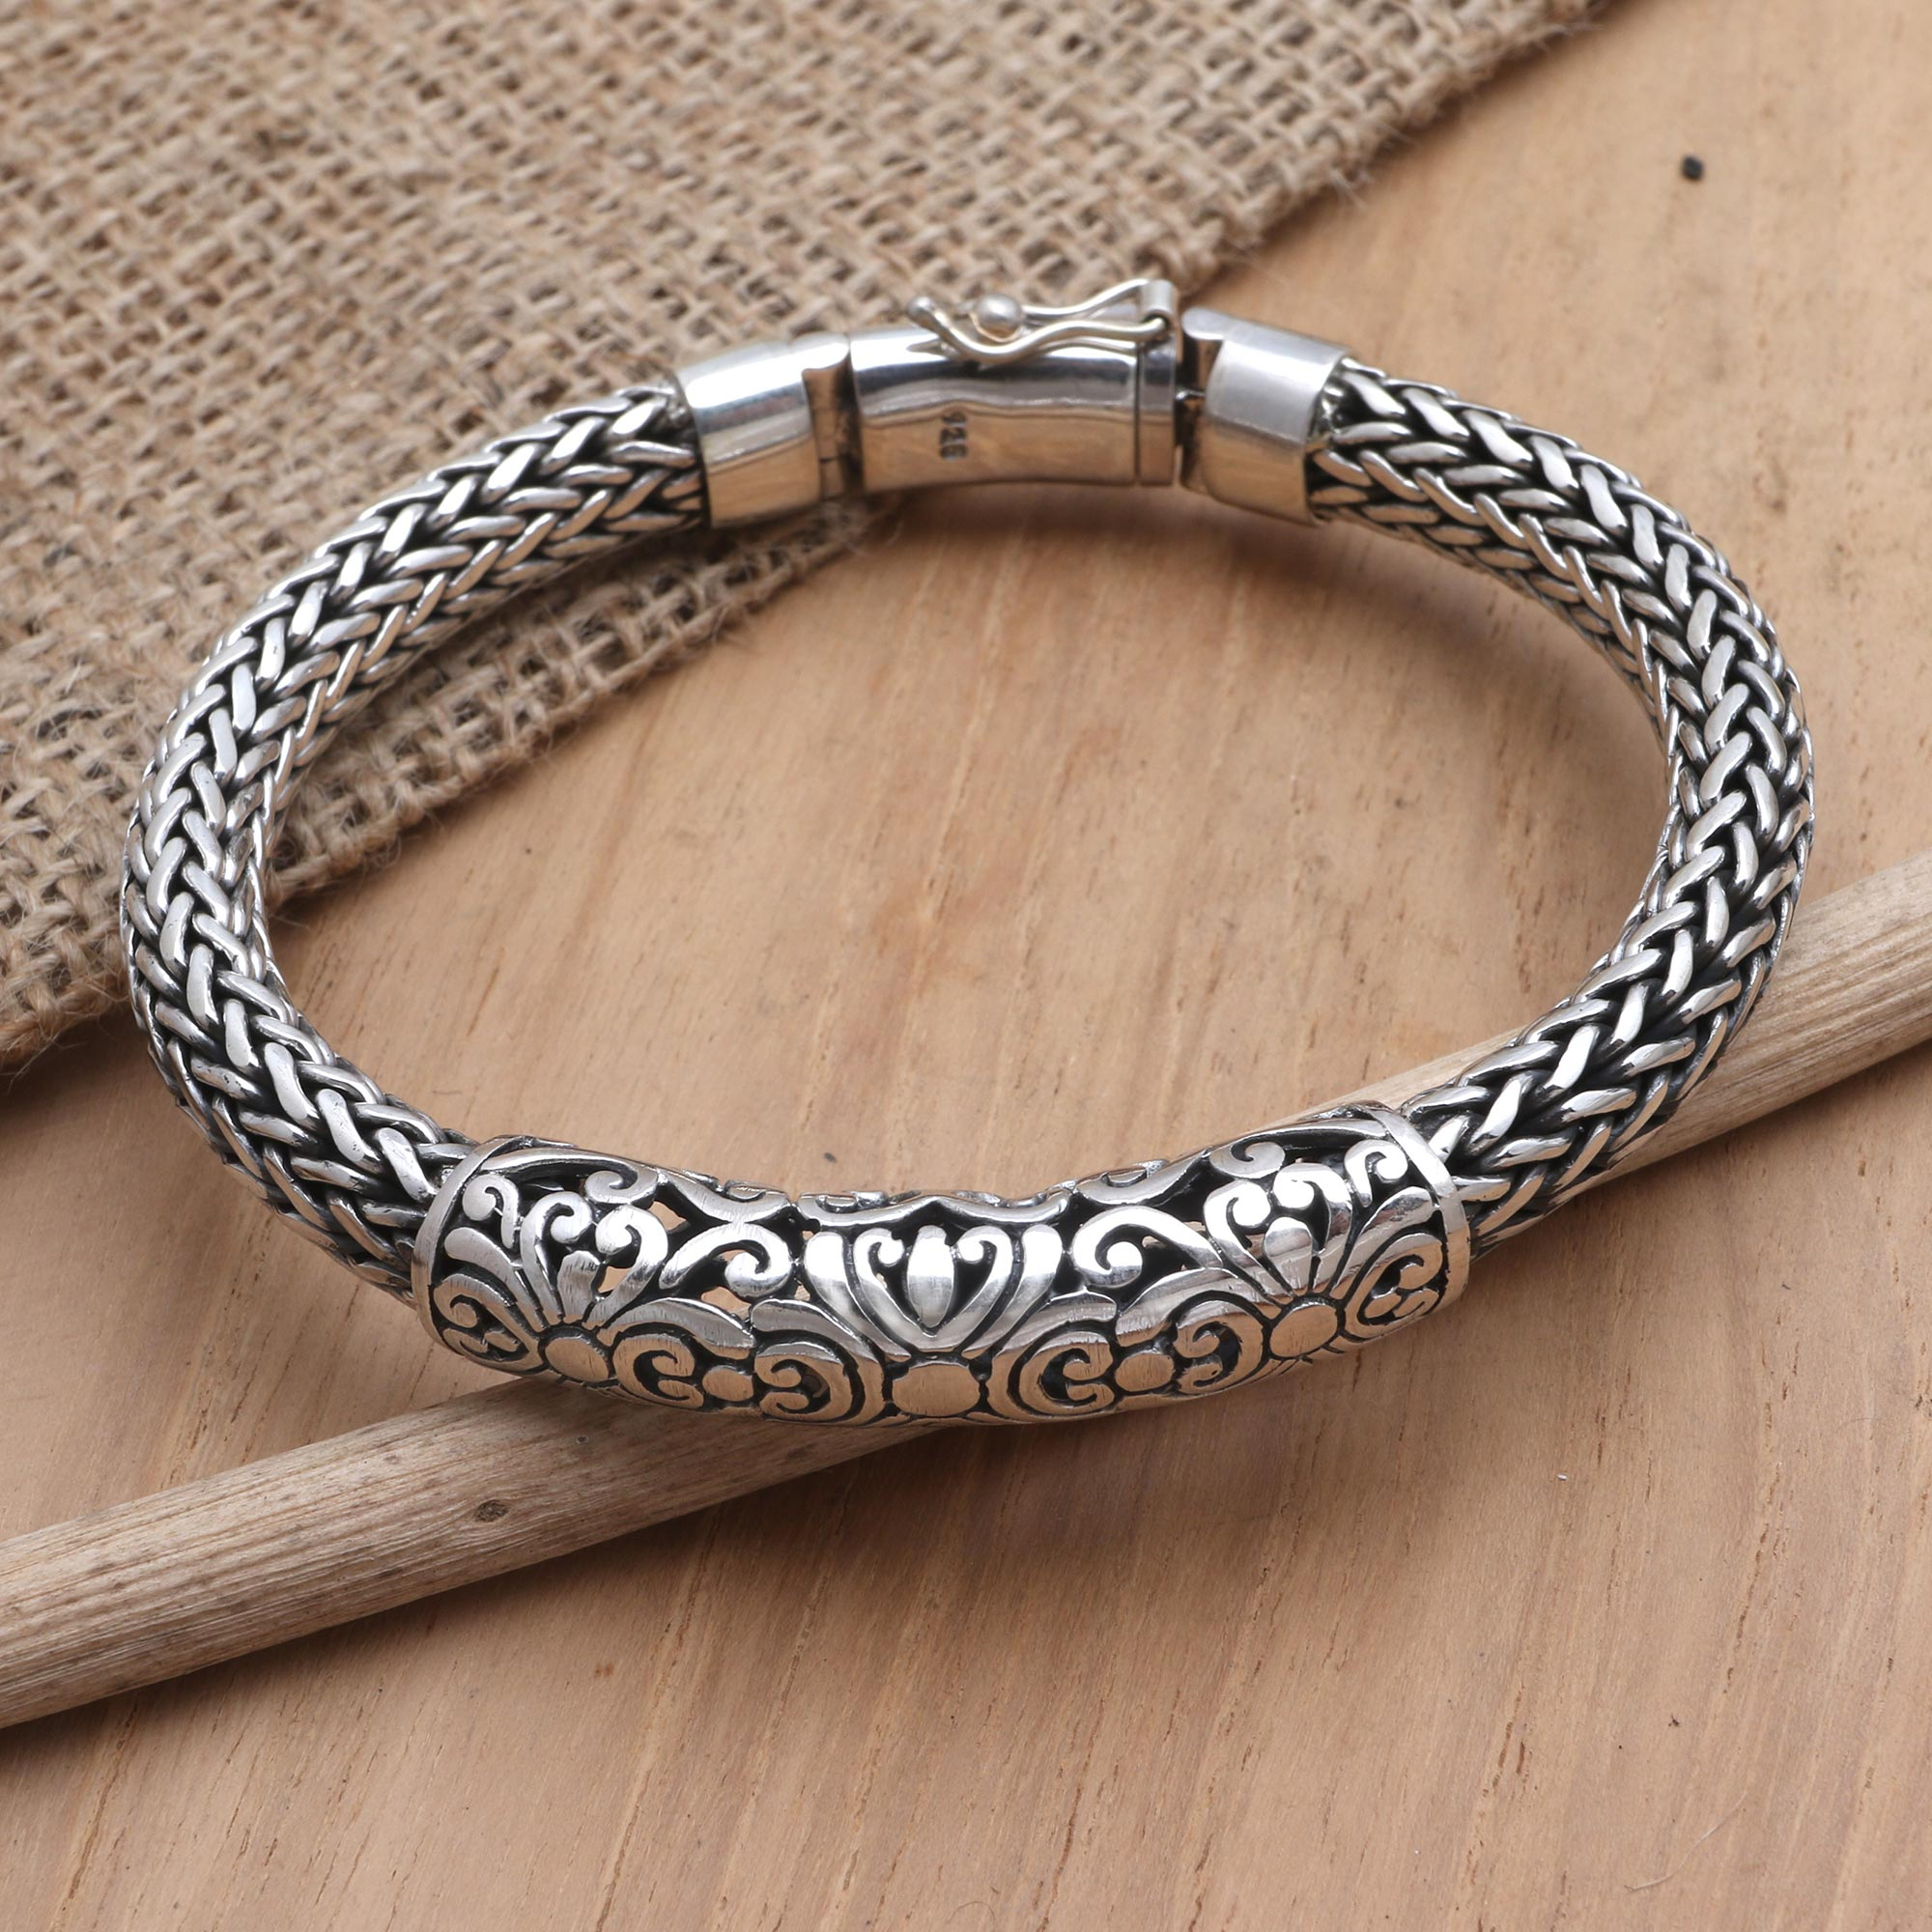 Amazon.com: NOVICA Handmade .925 Sterling Silver Cuff Bracelet Barong from  Indonesia Stone Animal Themed Wild Cat [5.5 in L (end to End) x 0.7 in W]  'Smiling Barong': Clothing, Shoes & Jewelry